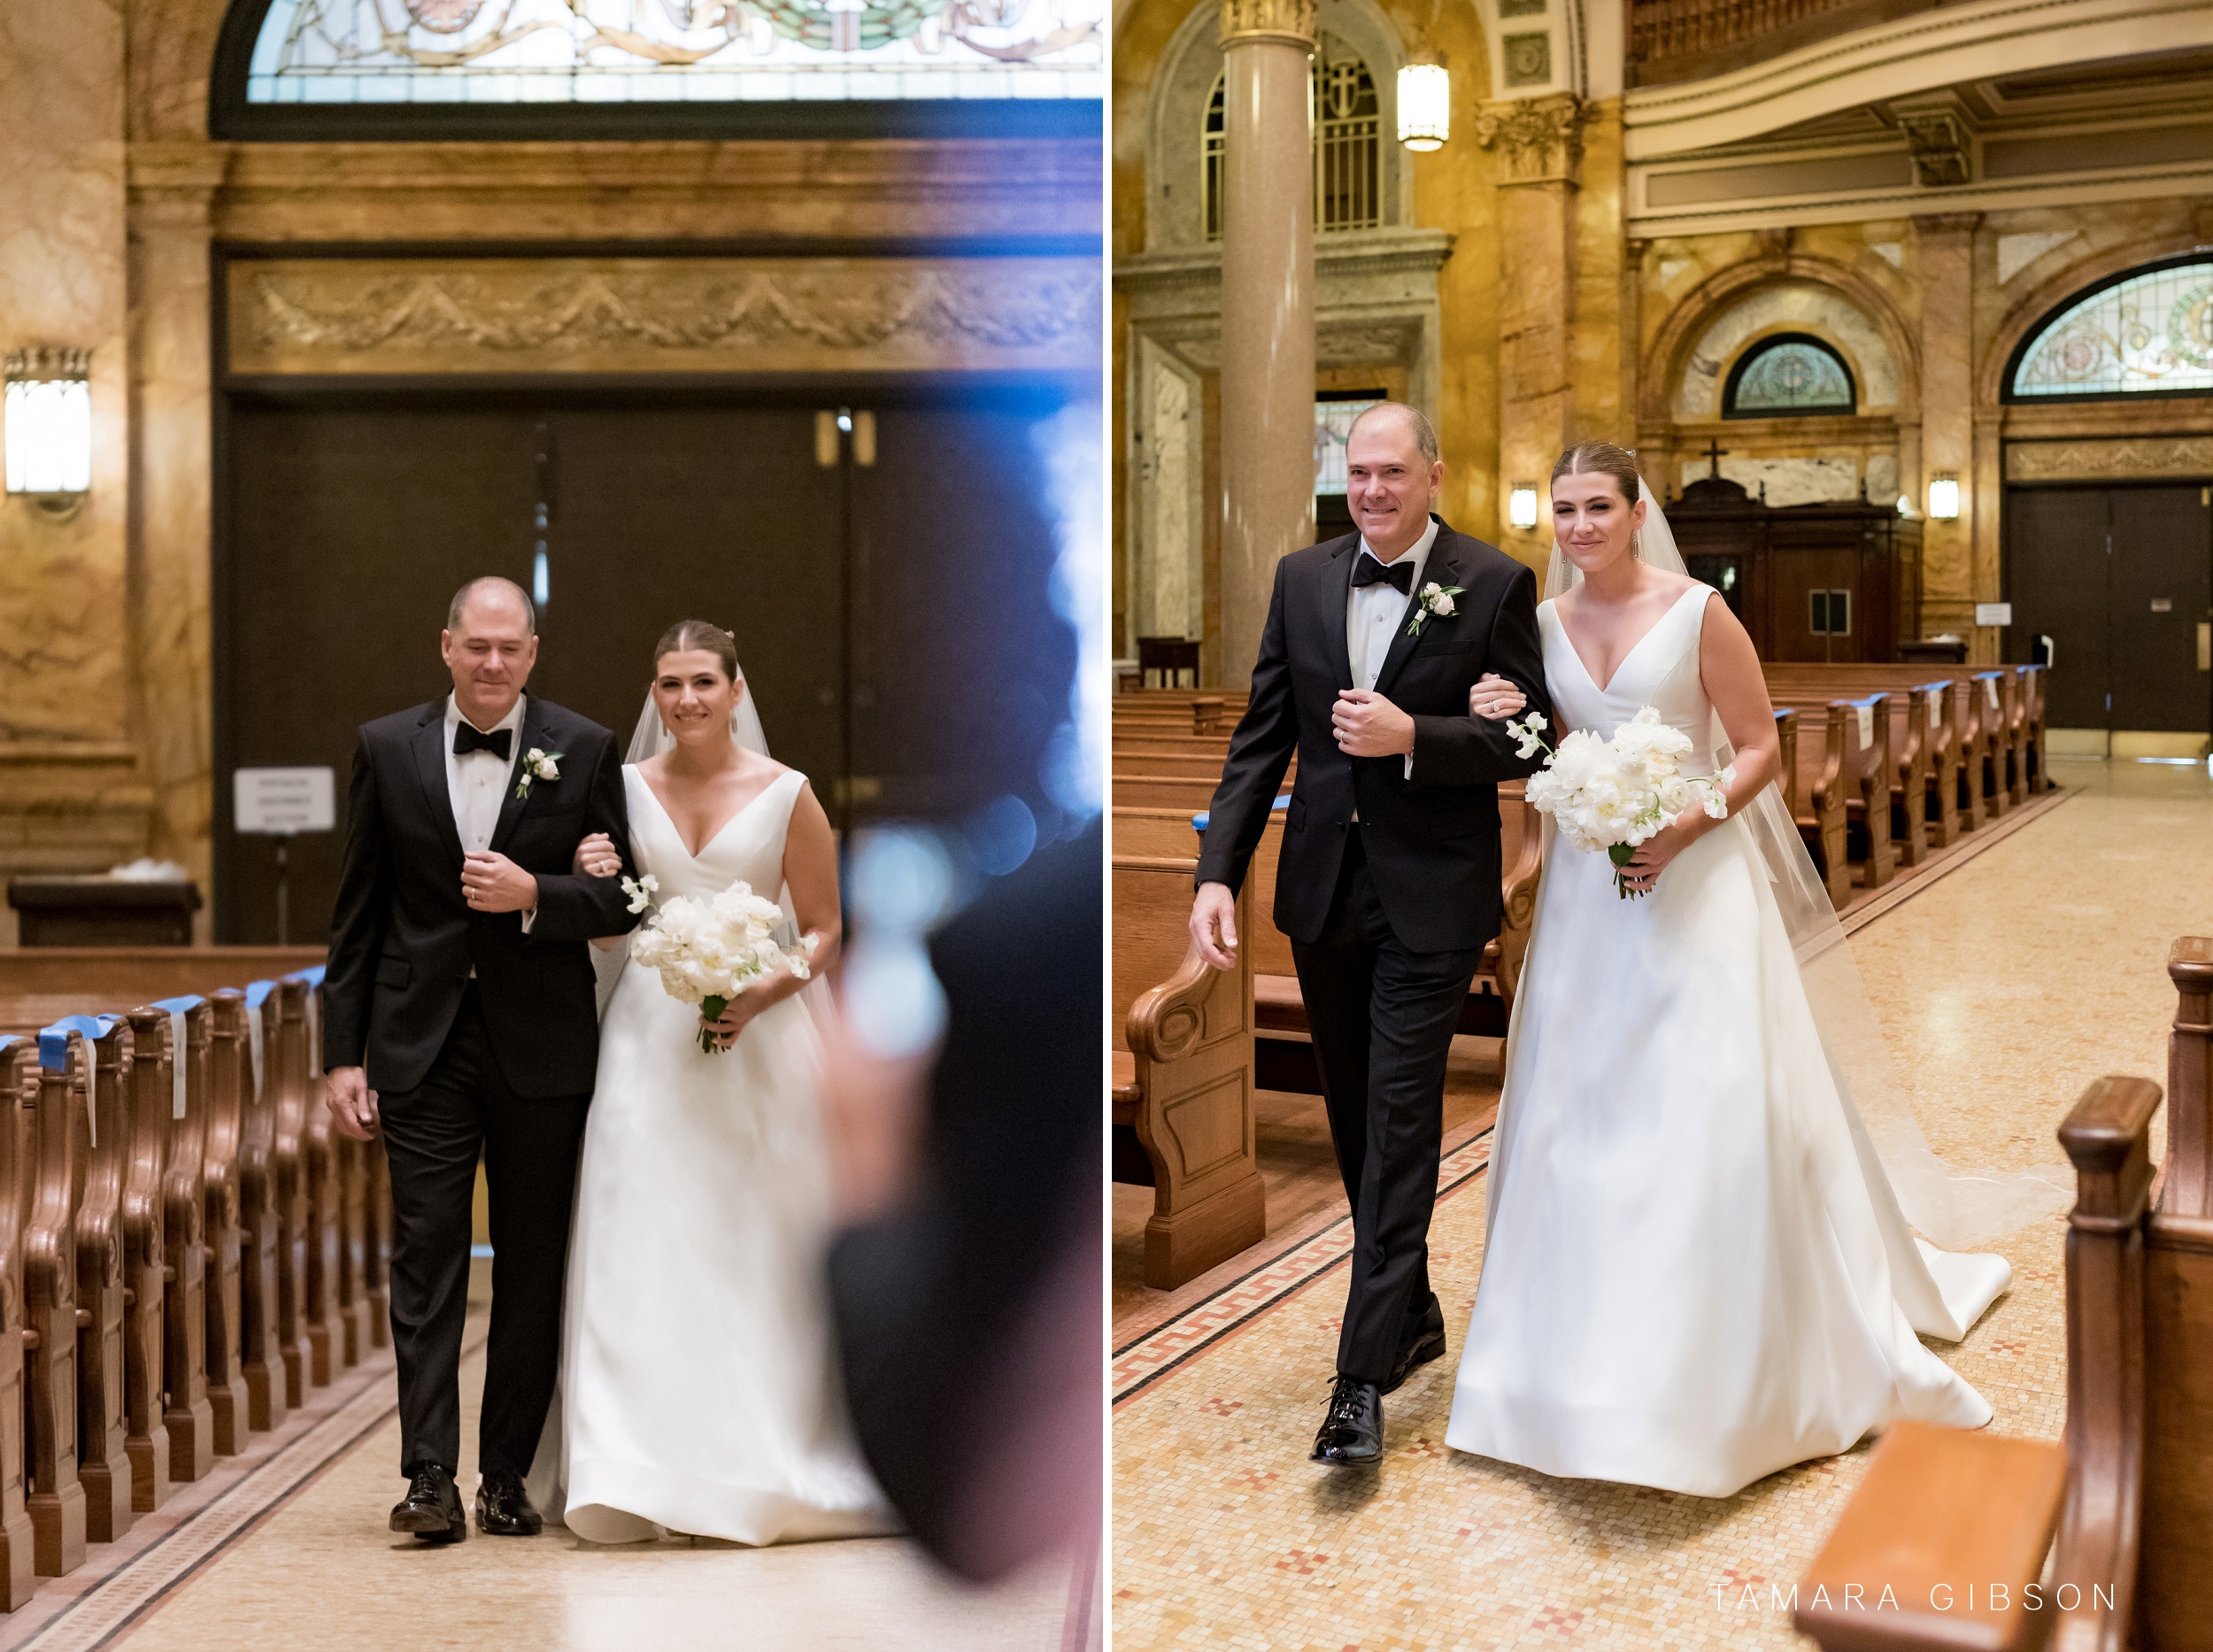 Father walking bride down the aisle during NYC wedding